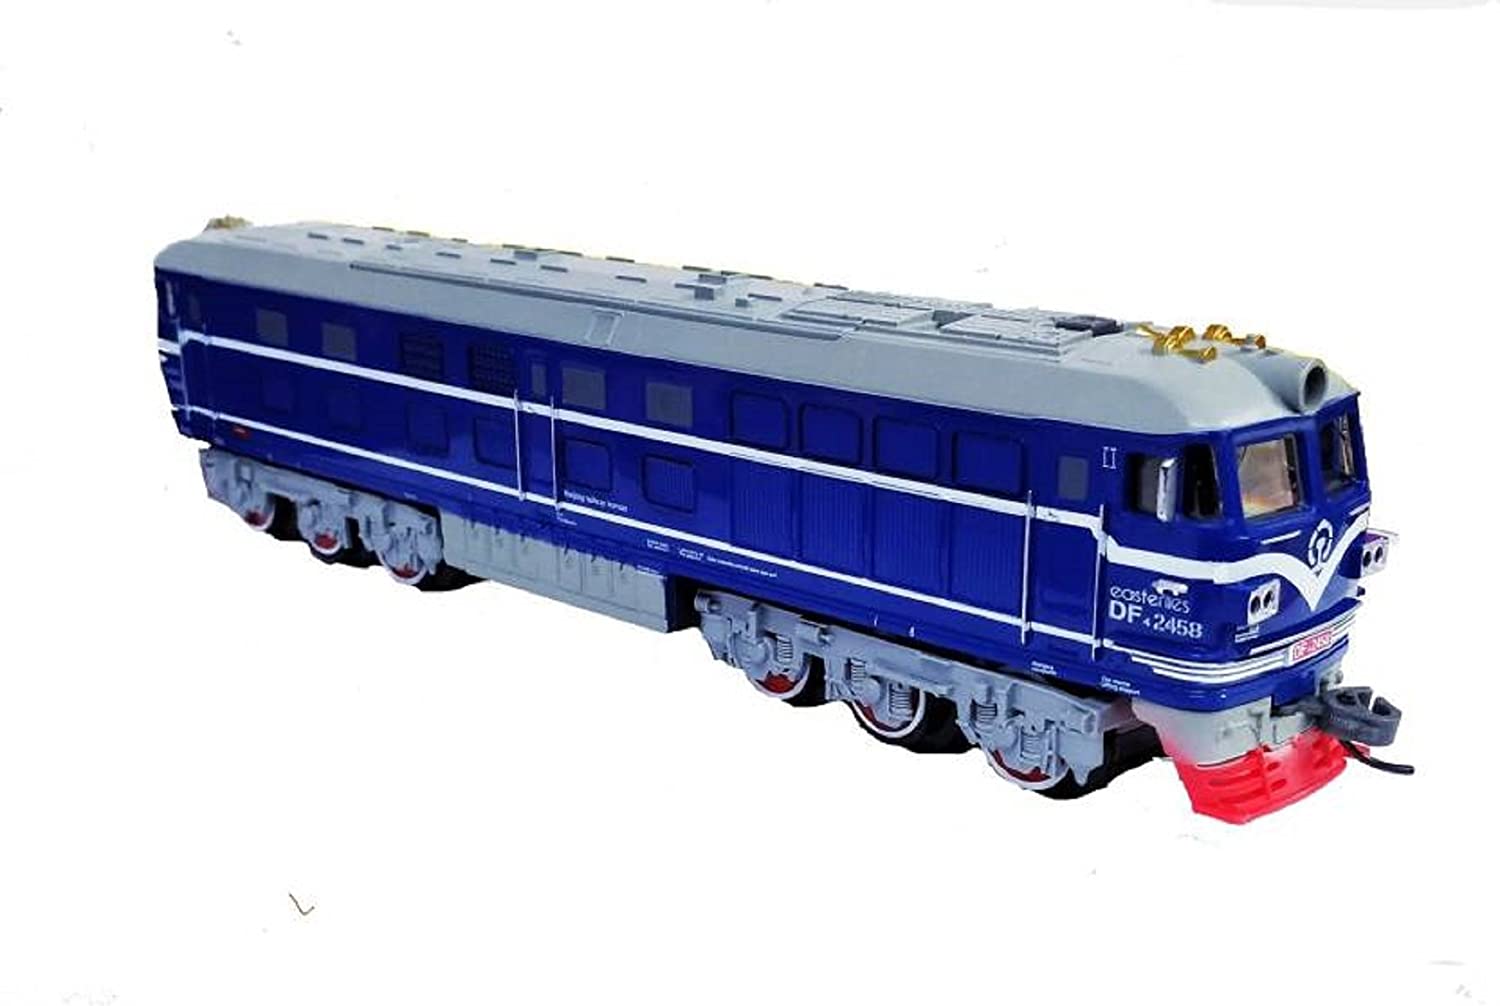 Emob Battery Operated Moving Train Toy with Realistic Light and Sound